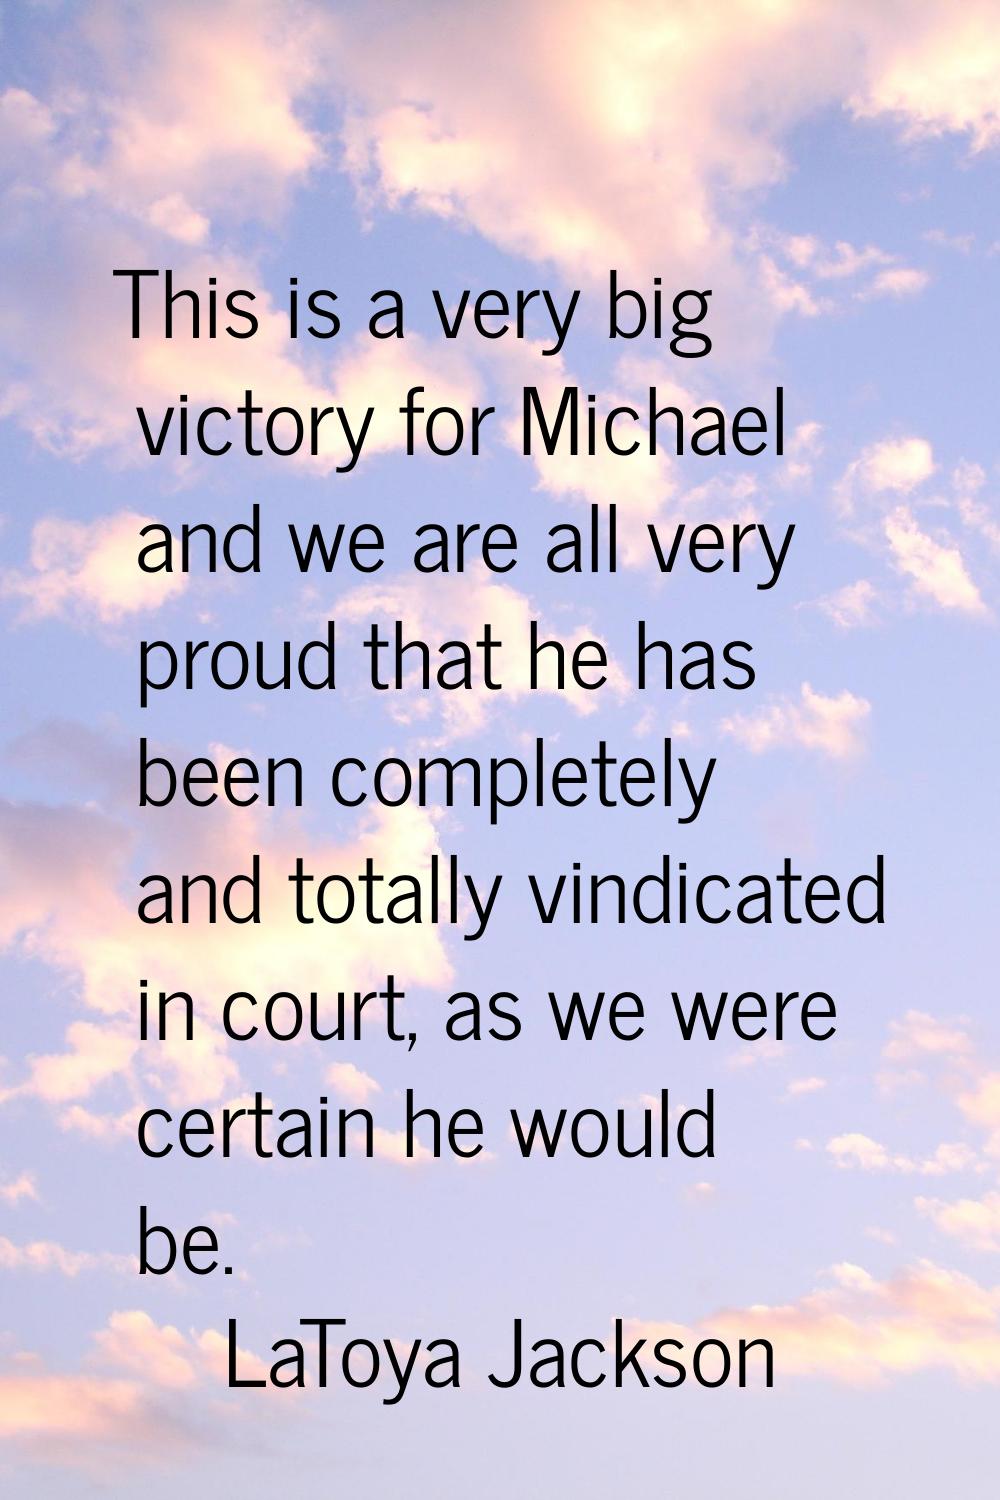 This is a very big victory for Michael and we are all very proud that he has been completely and to